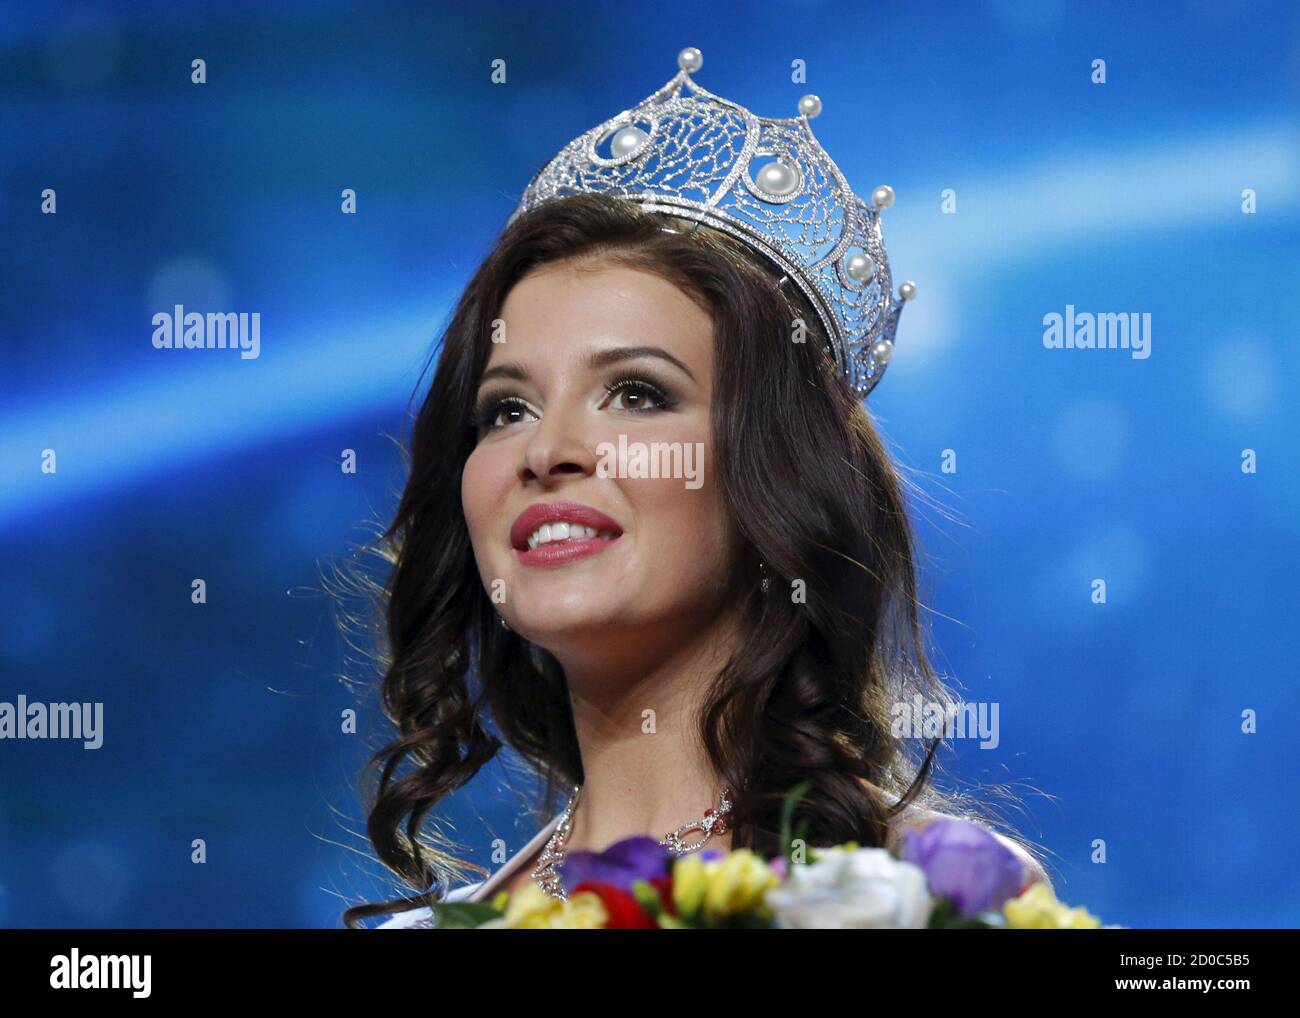 Sofia Nikitchuk from Yekaterinburg reacts after winning the annual national  "Miss Russia" beauty pageant at the Barvikha Luxury Village Concert Hall  outside Moscow April 18, 2015. The contest has exclusive rights to